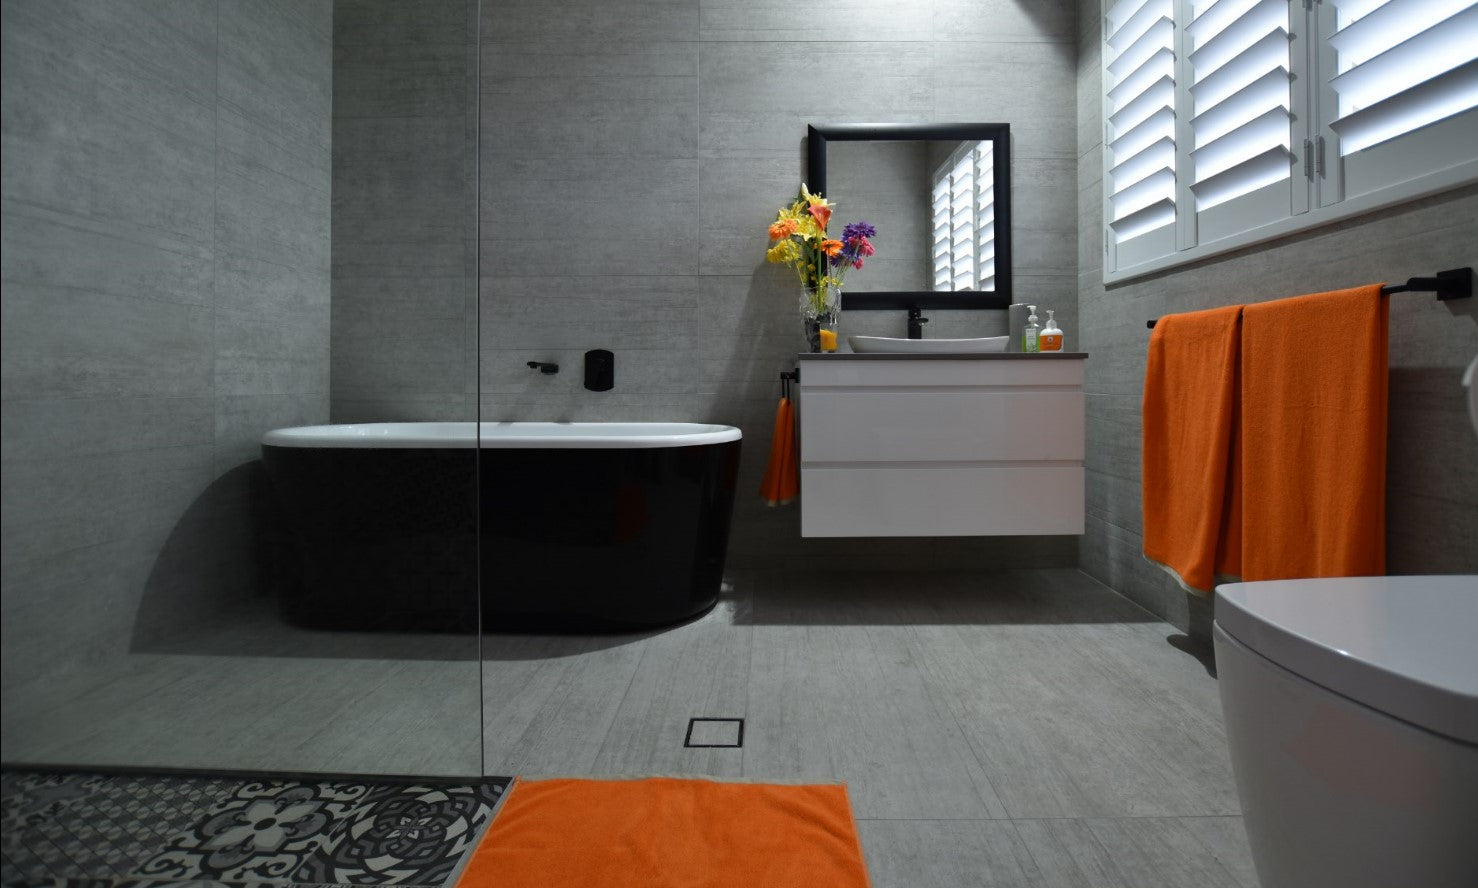 Bathroom uses large format tiles, wall hung vanity and a walk in shower for low maintenance cleaning design